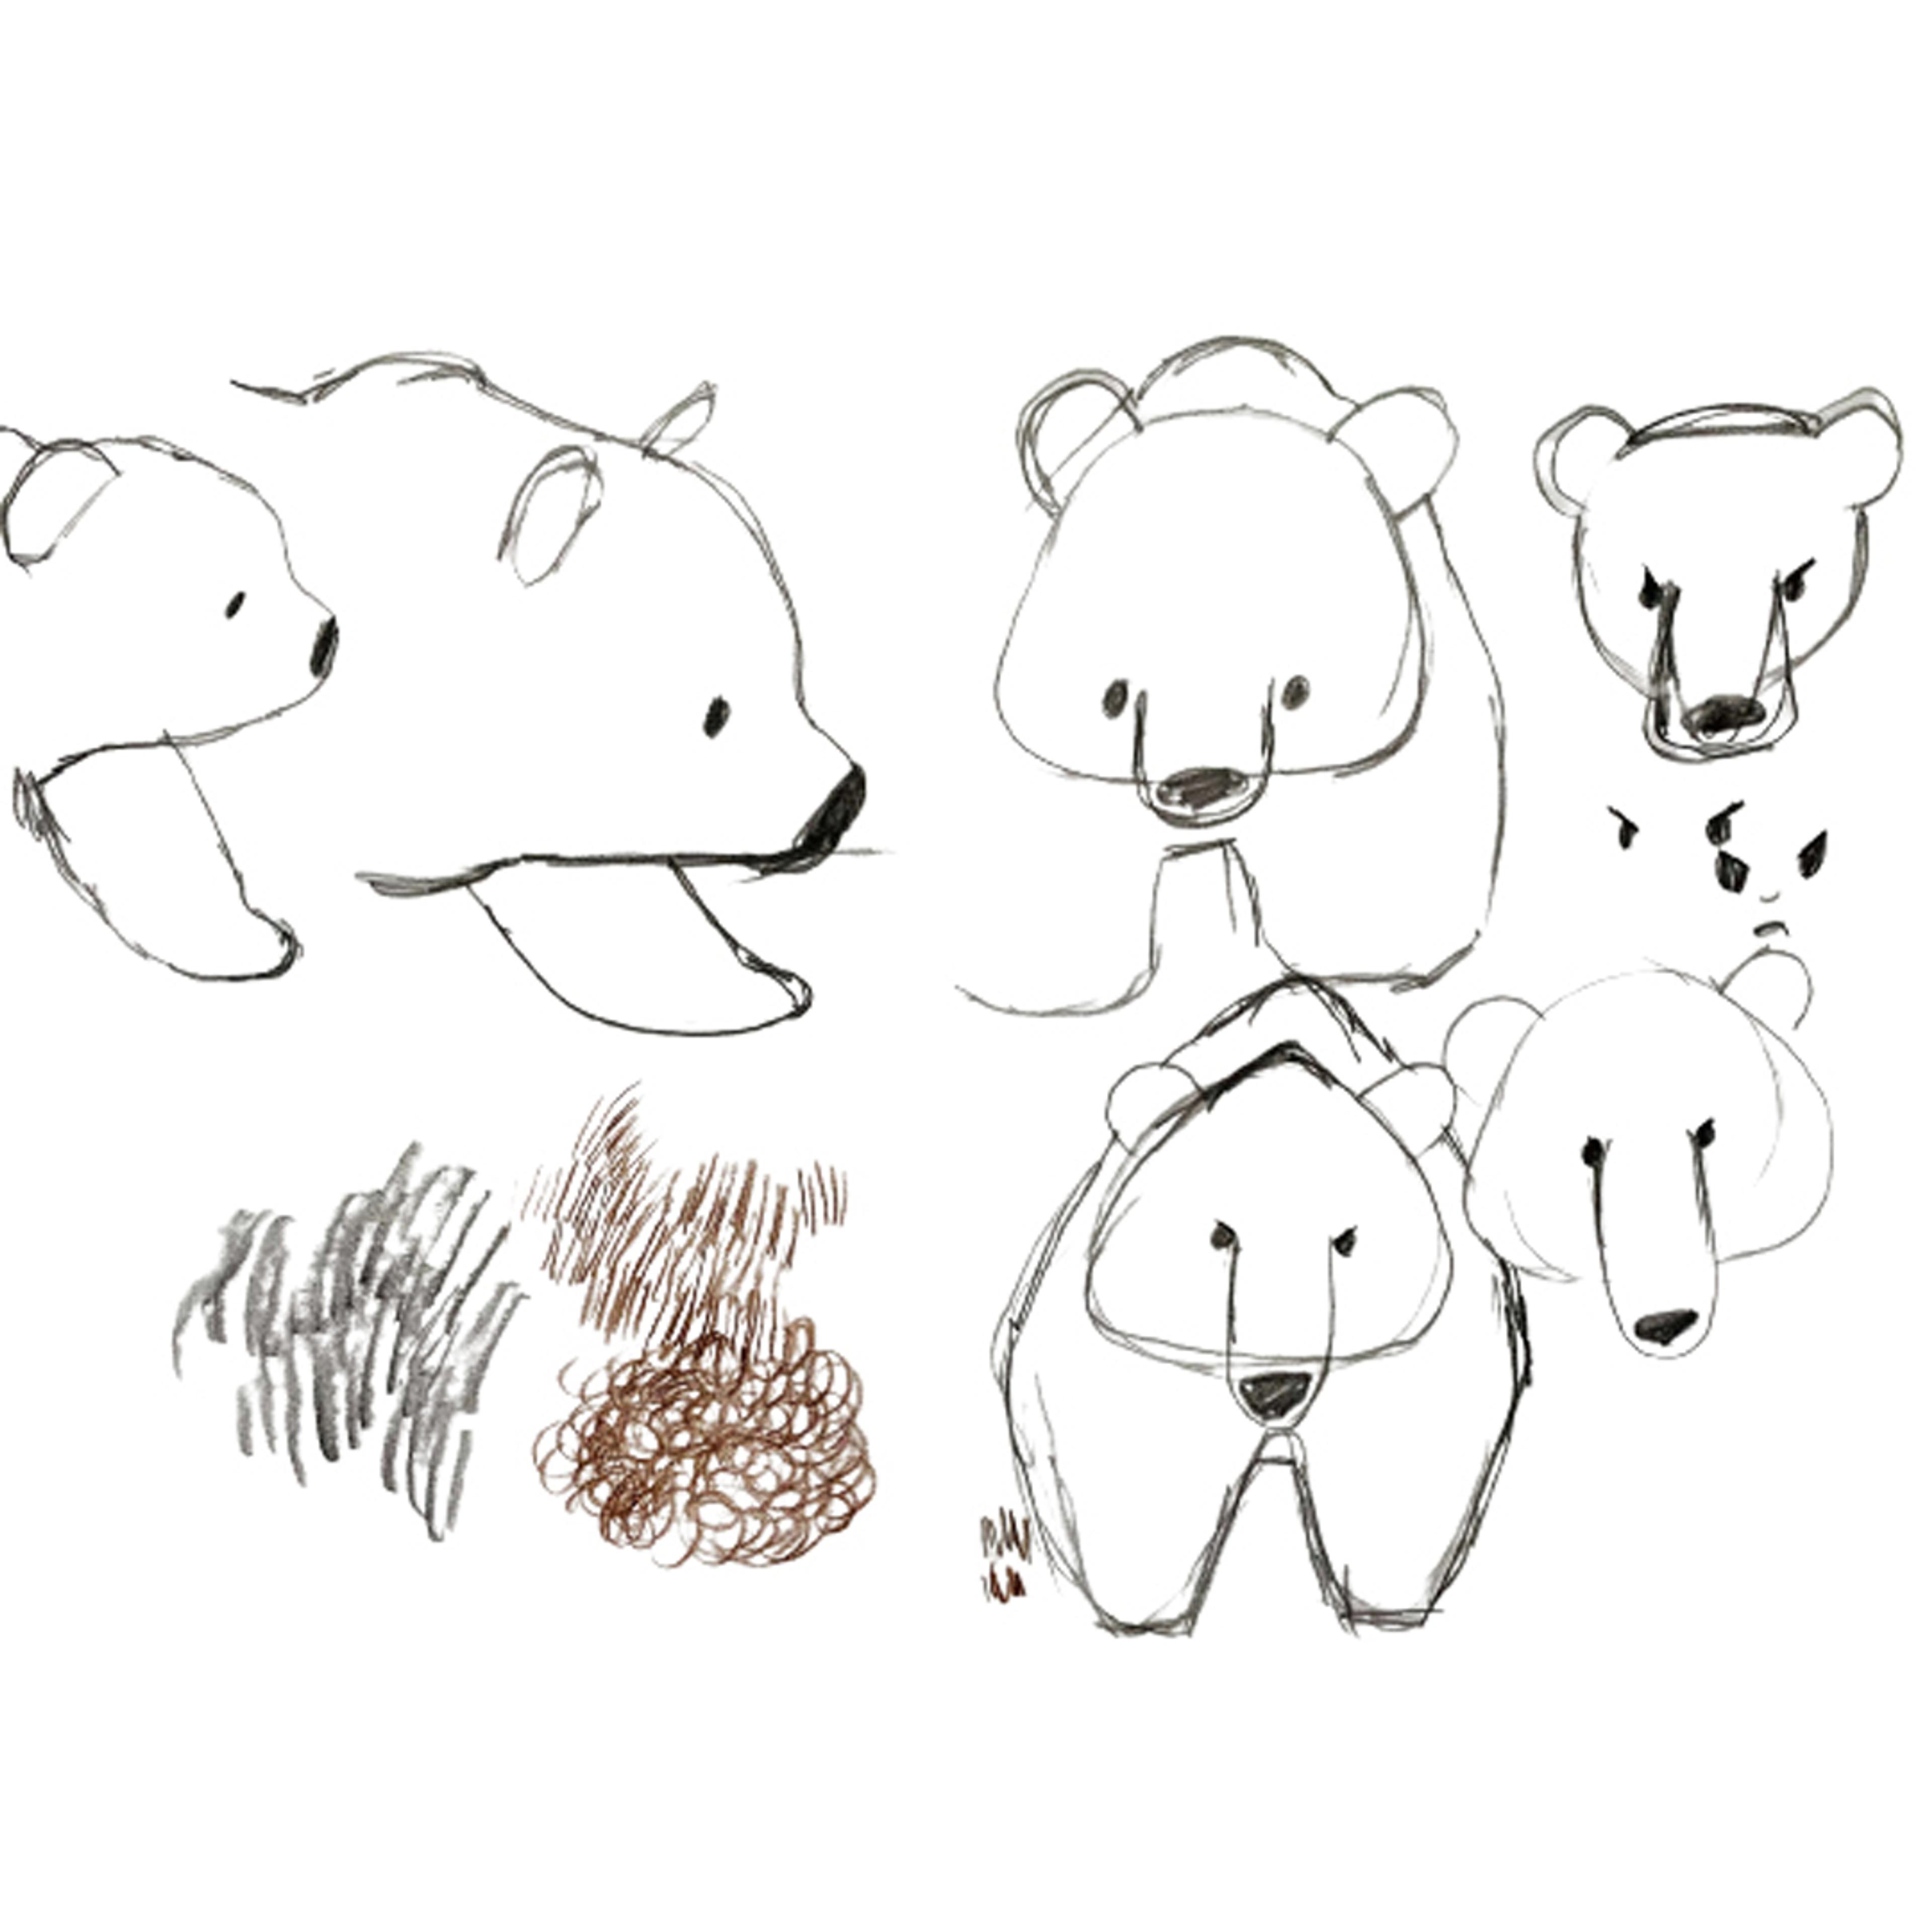 Sketches of bears